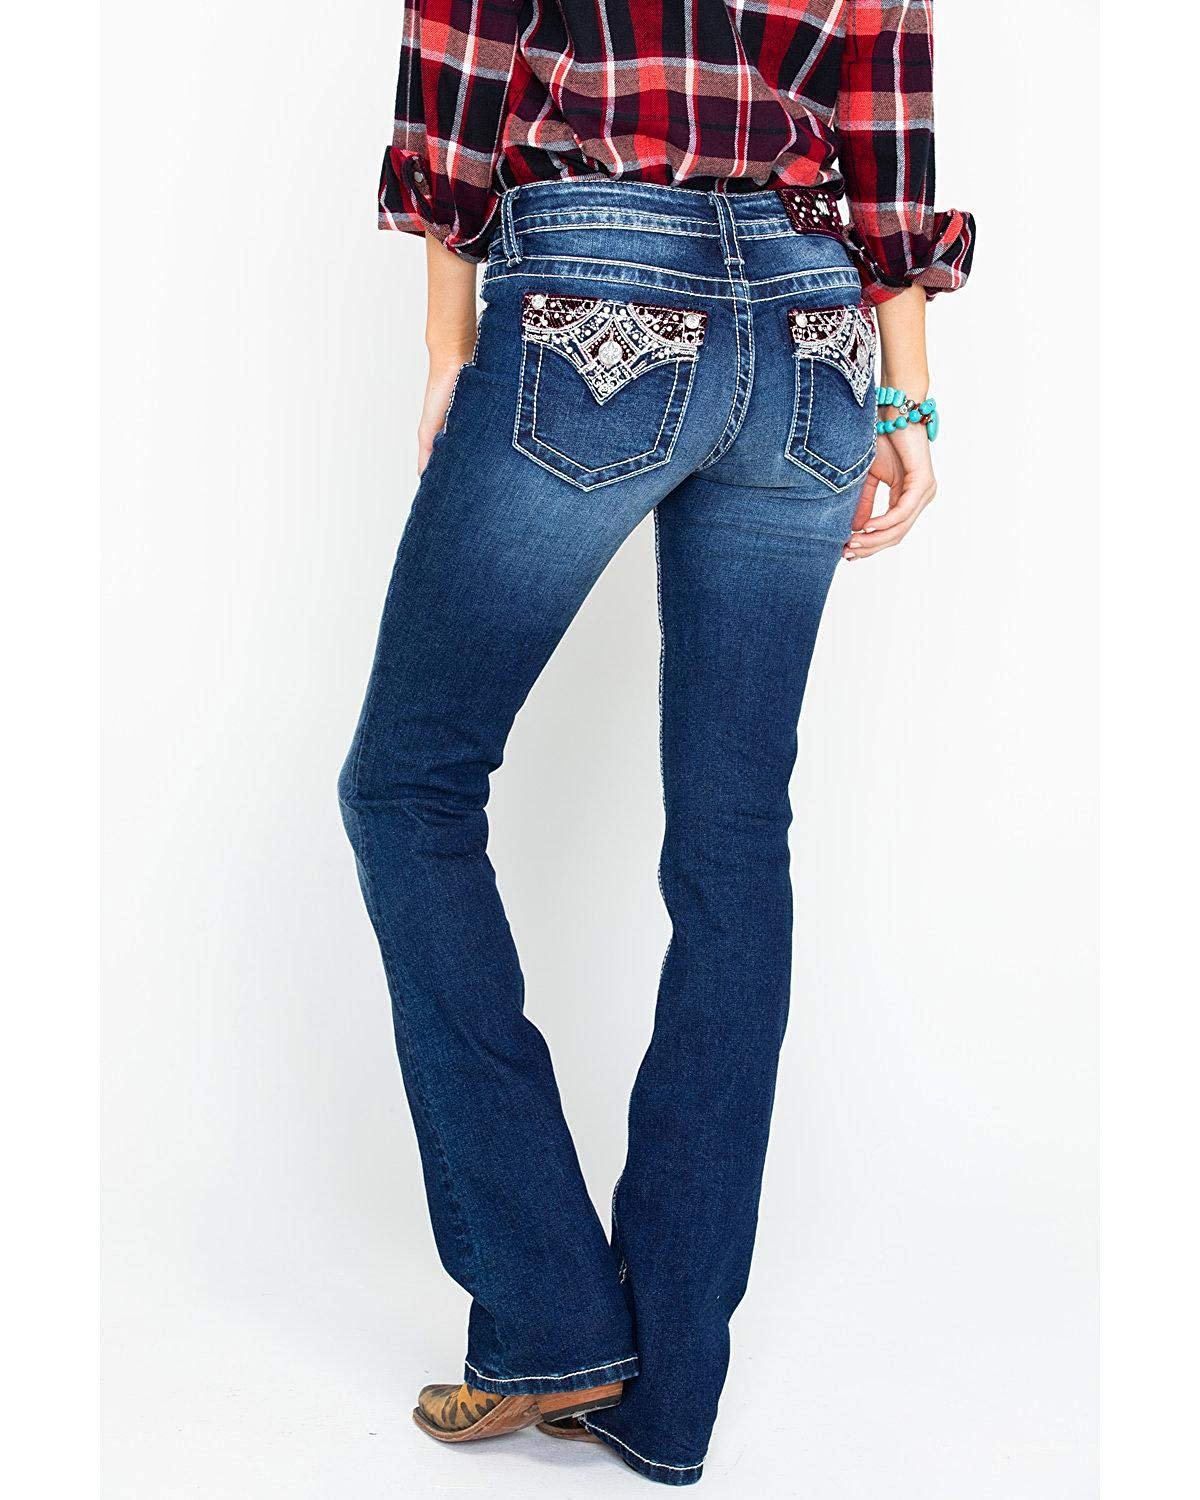 Aztec Inspired Embellished Bootcut Jeans